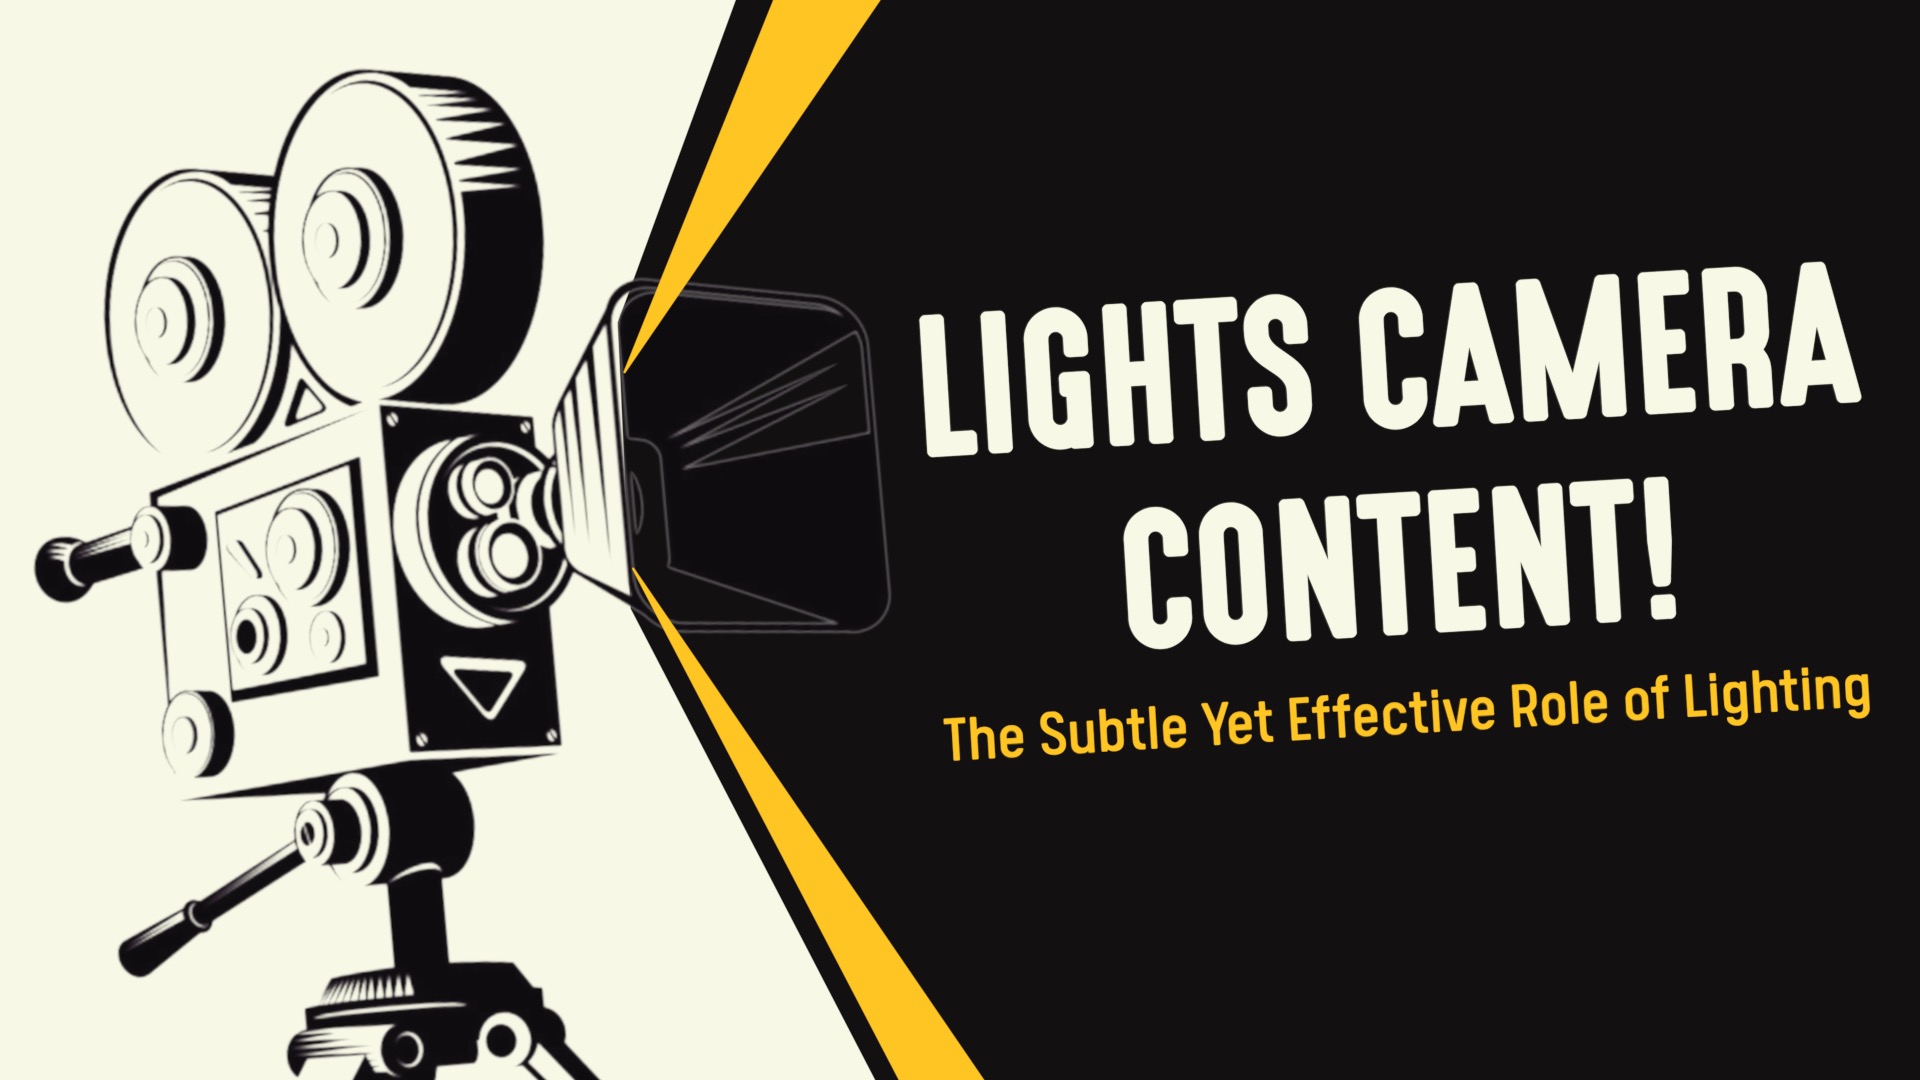 Light Camera Content! The Subtle Yet Effective Role of Lighting